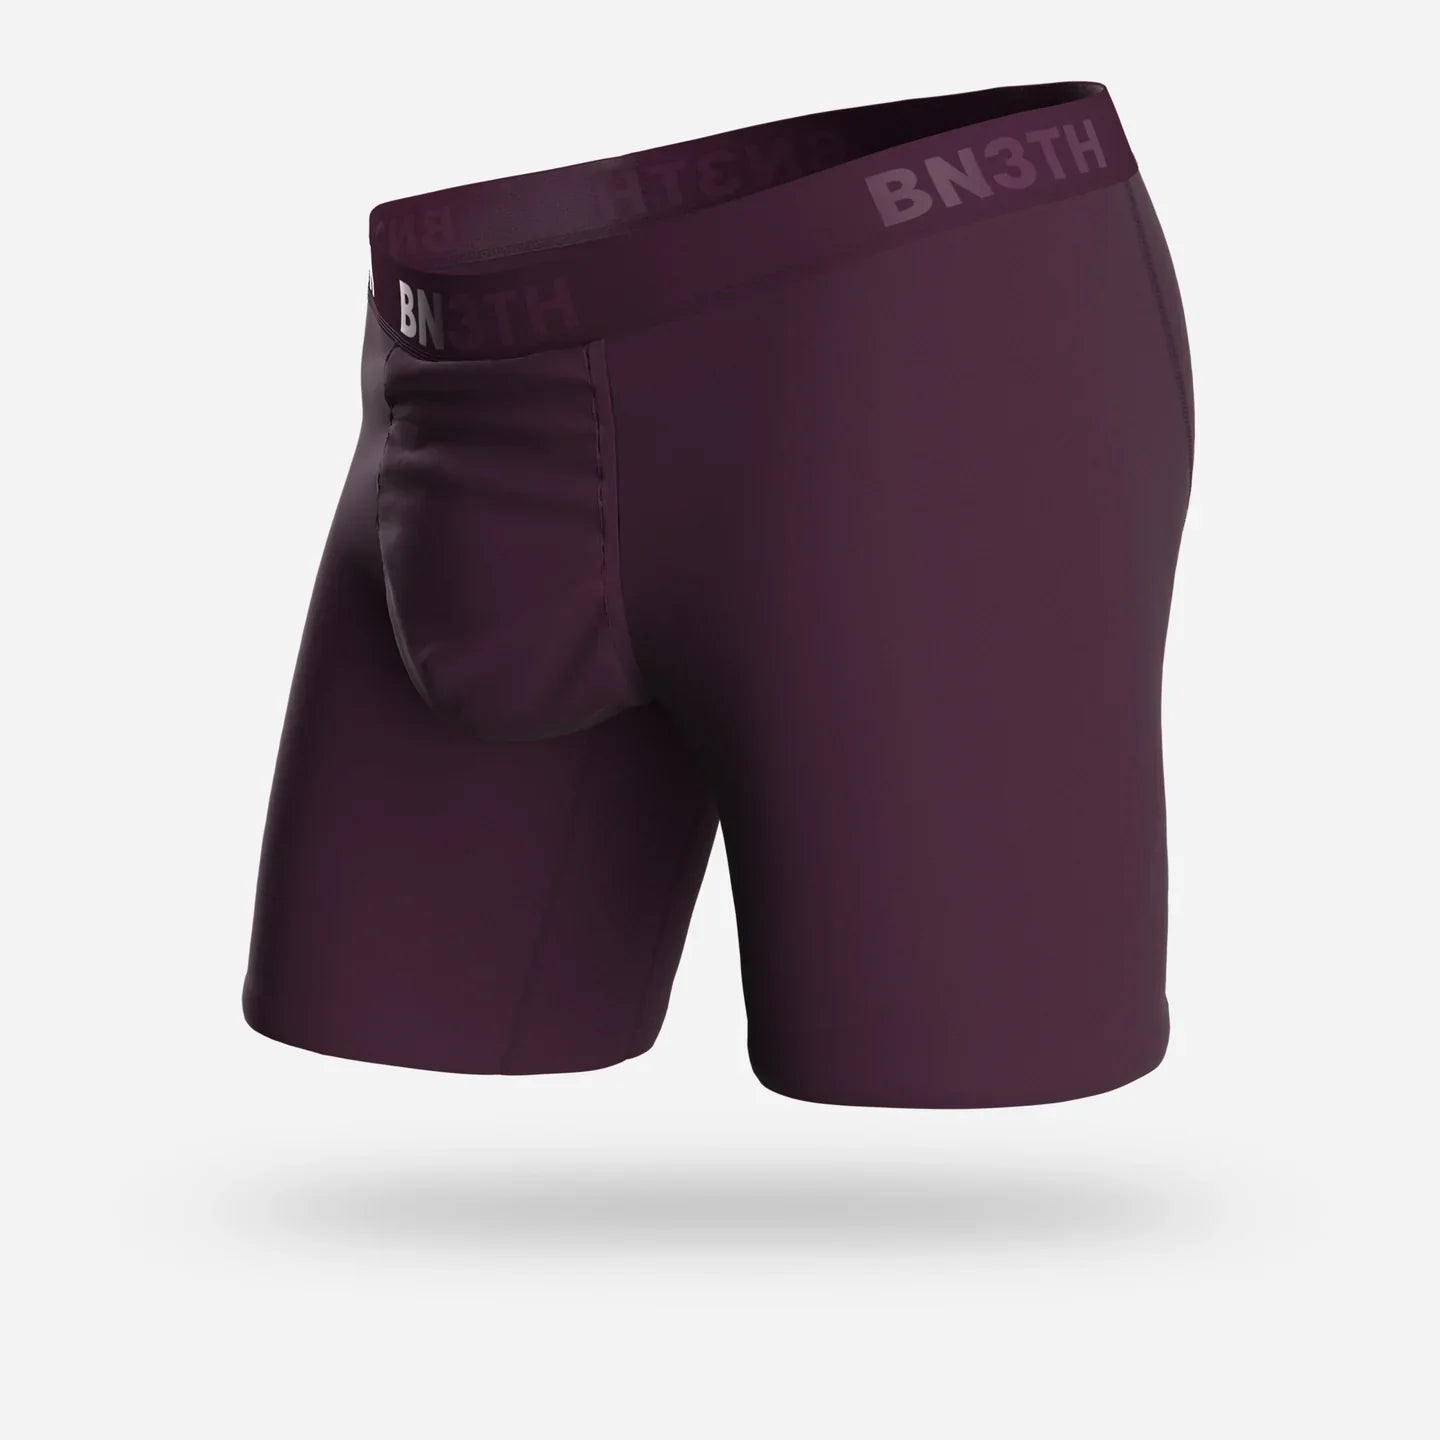 Classic Boxer Brief in Solid Cabernet